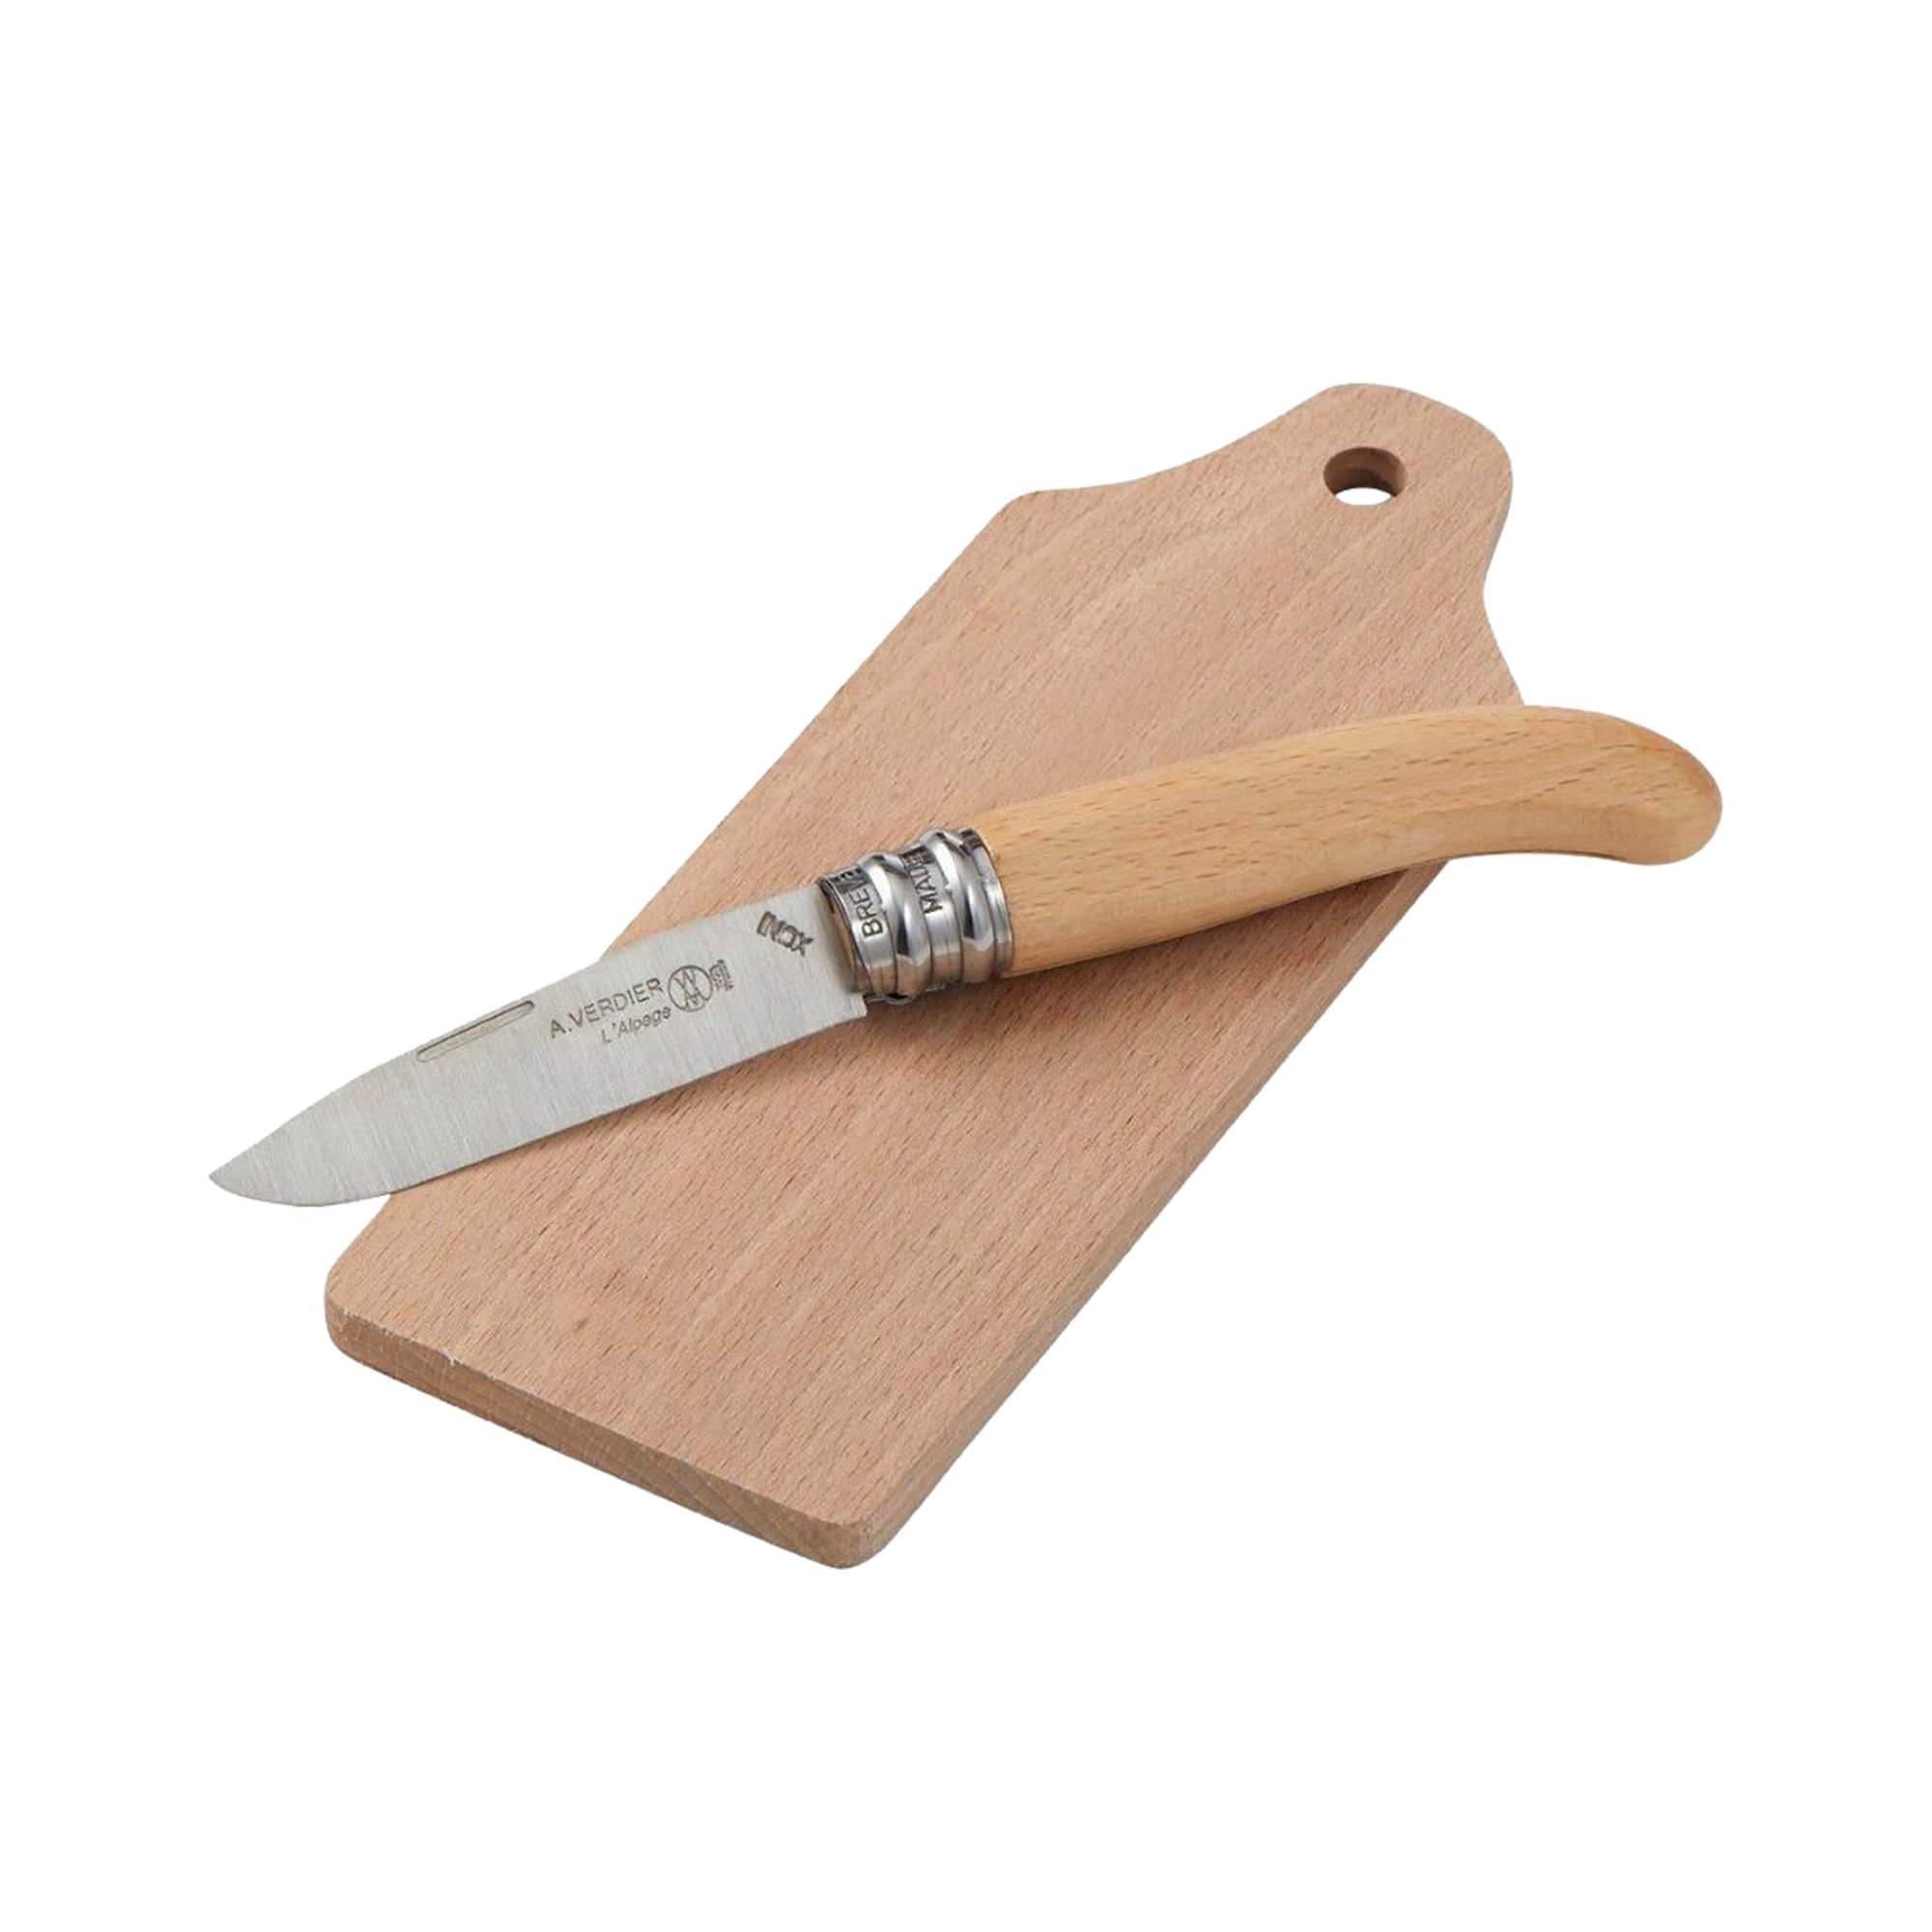 Andre Verdier Picnic Chopping Board and Folding Knife 2pc Beechwood Image 1